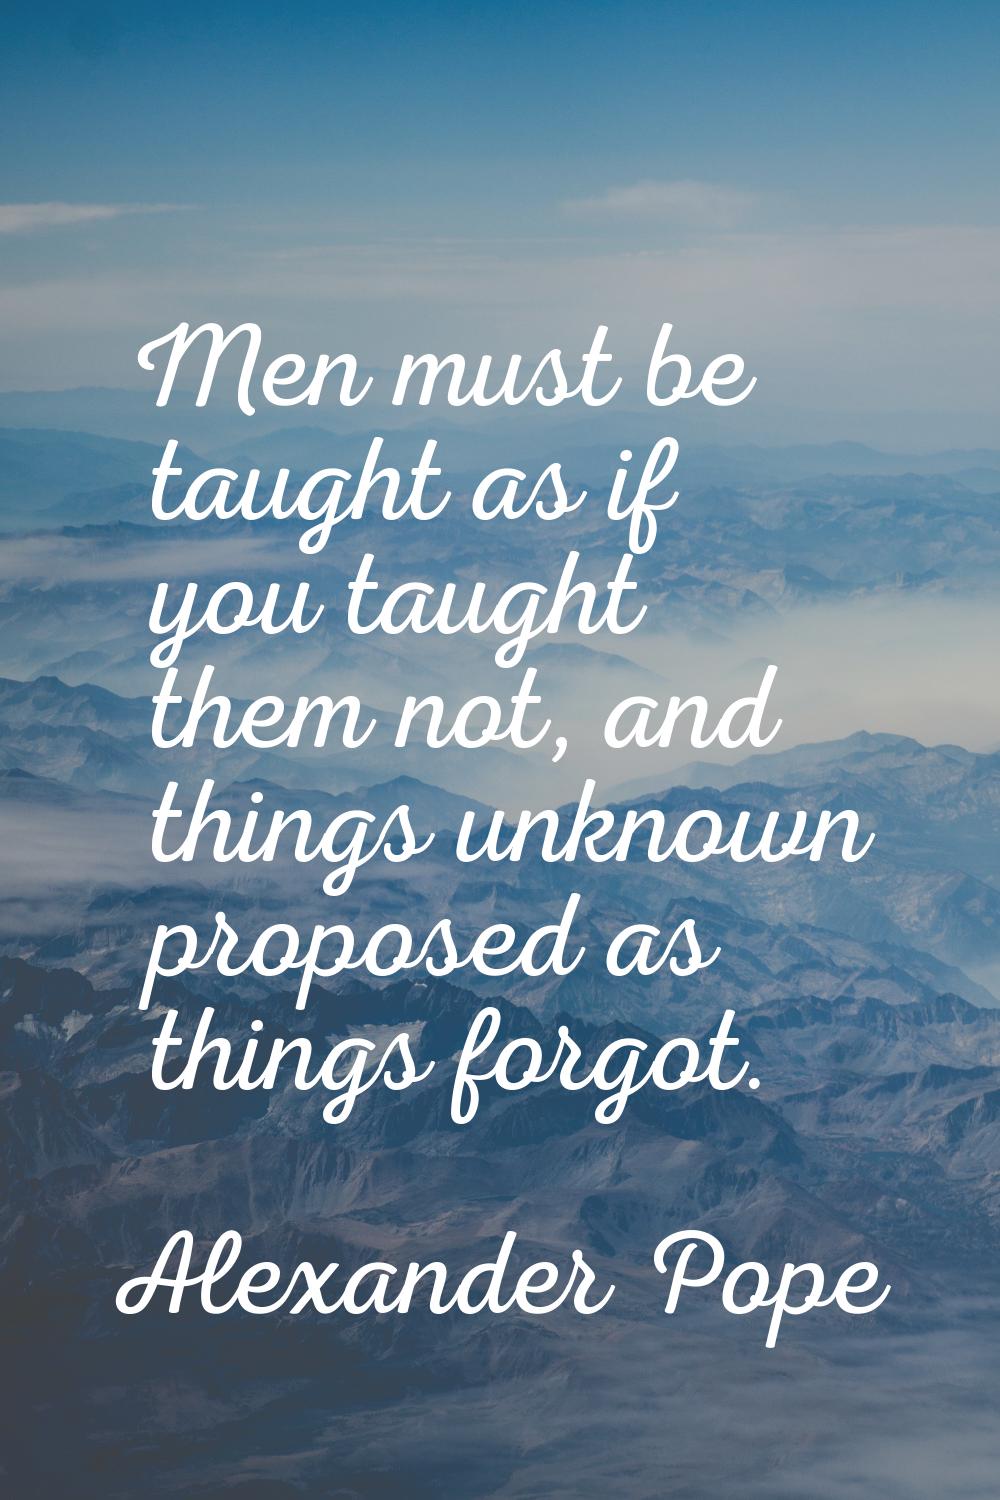 Men must be taught as if you taught them not, and things unknown proposed as things forgot.